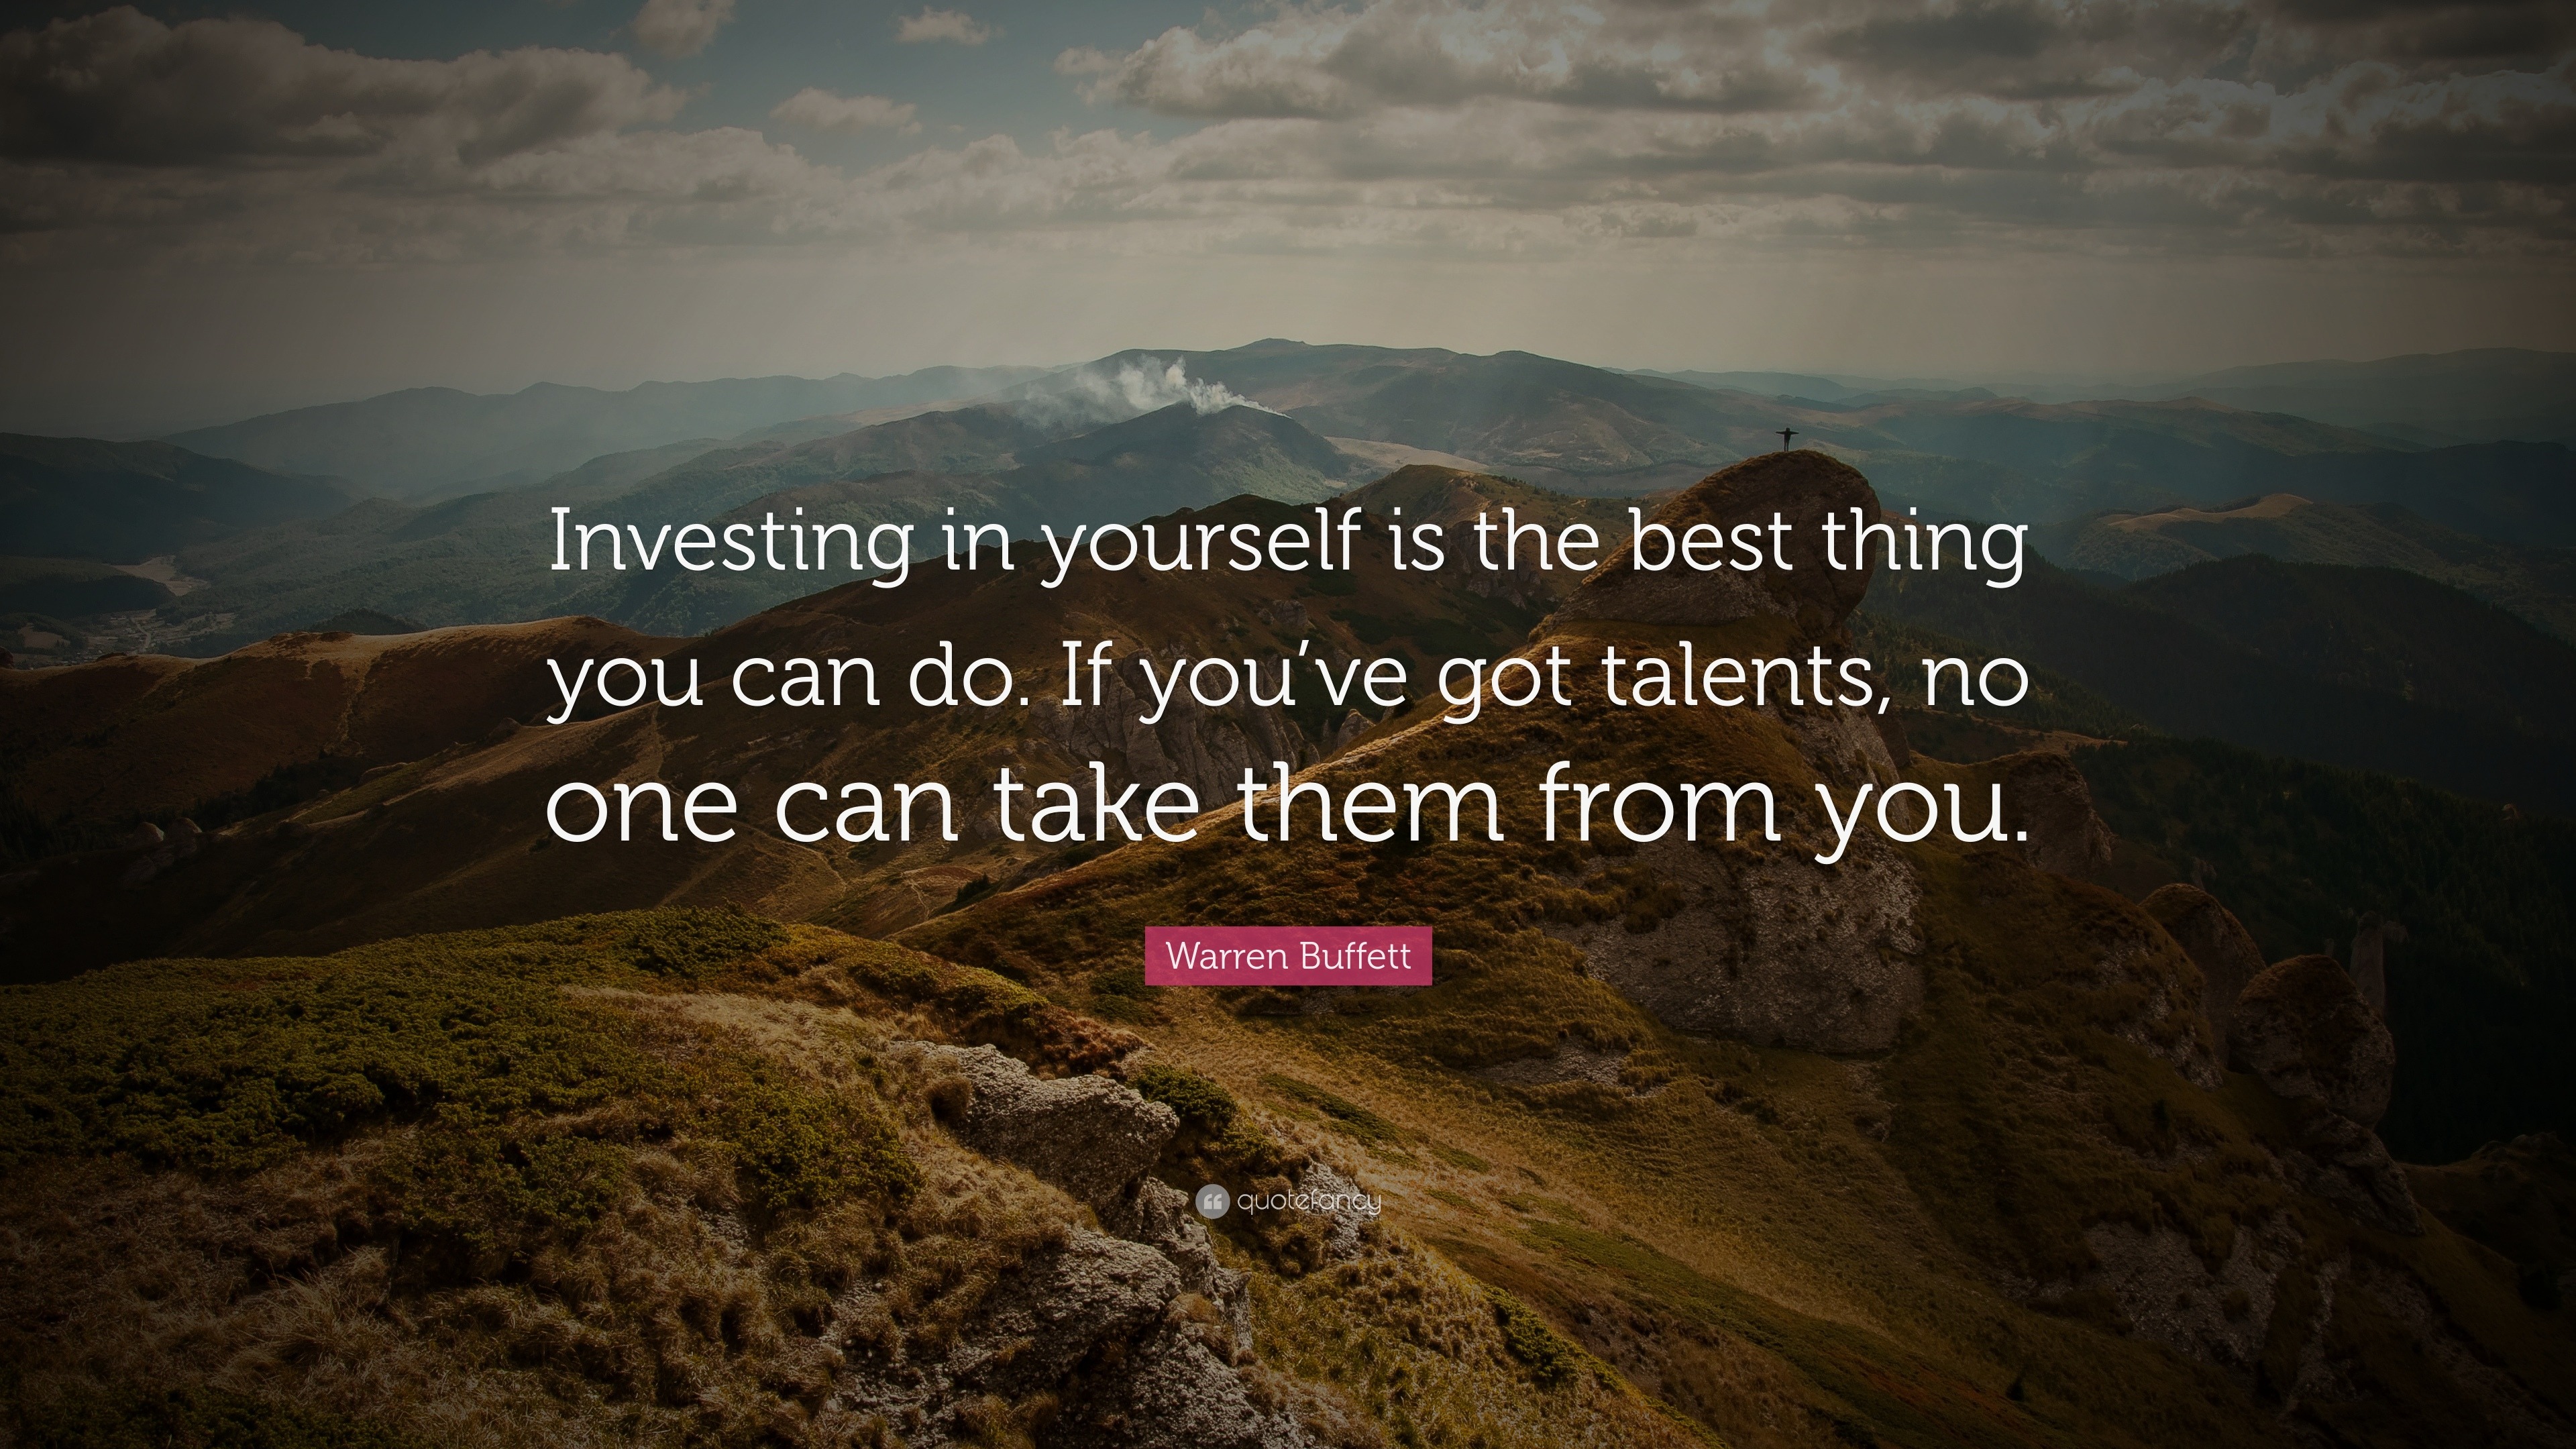 Warren Buffett Quote: "Investing in yourself is the best thing you can do. If you've got talents ...